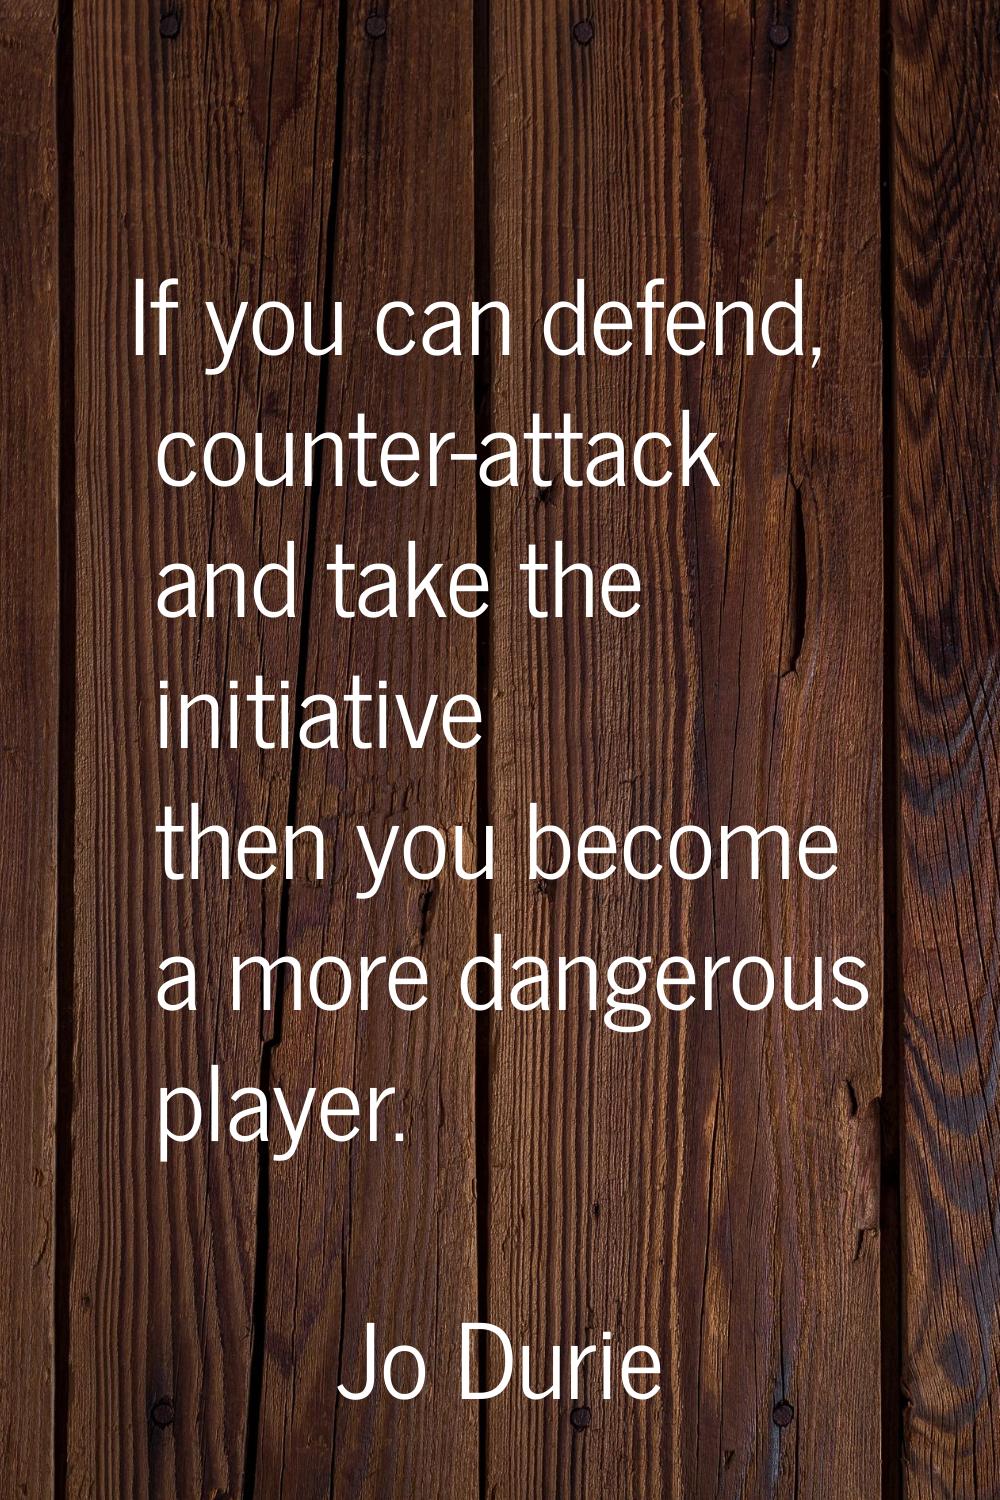 If you can defend, counter-attack and take the initiative then you become a more dangerous player.